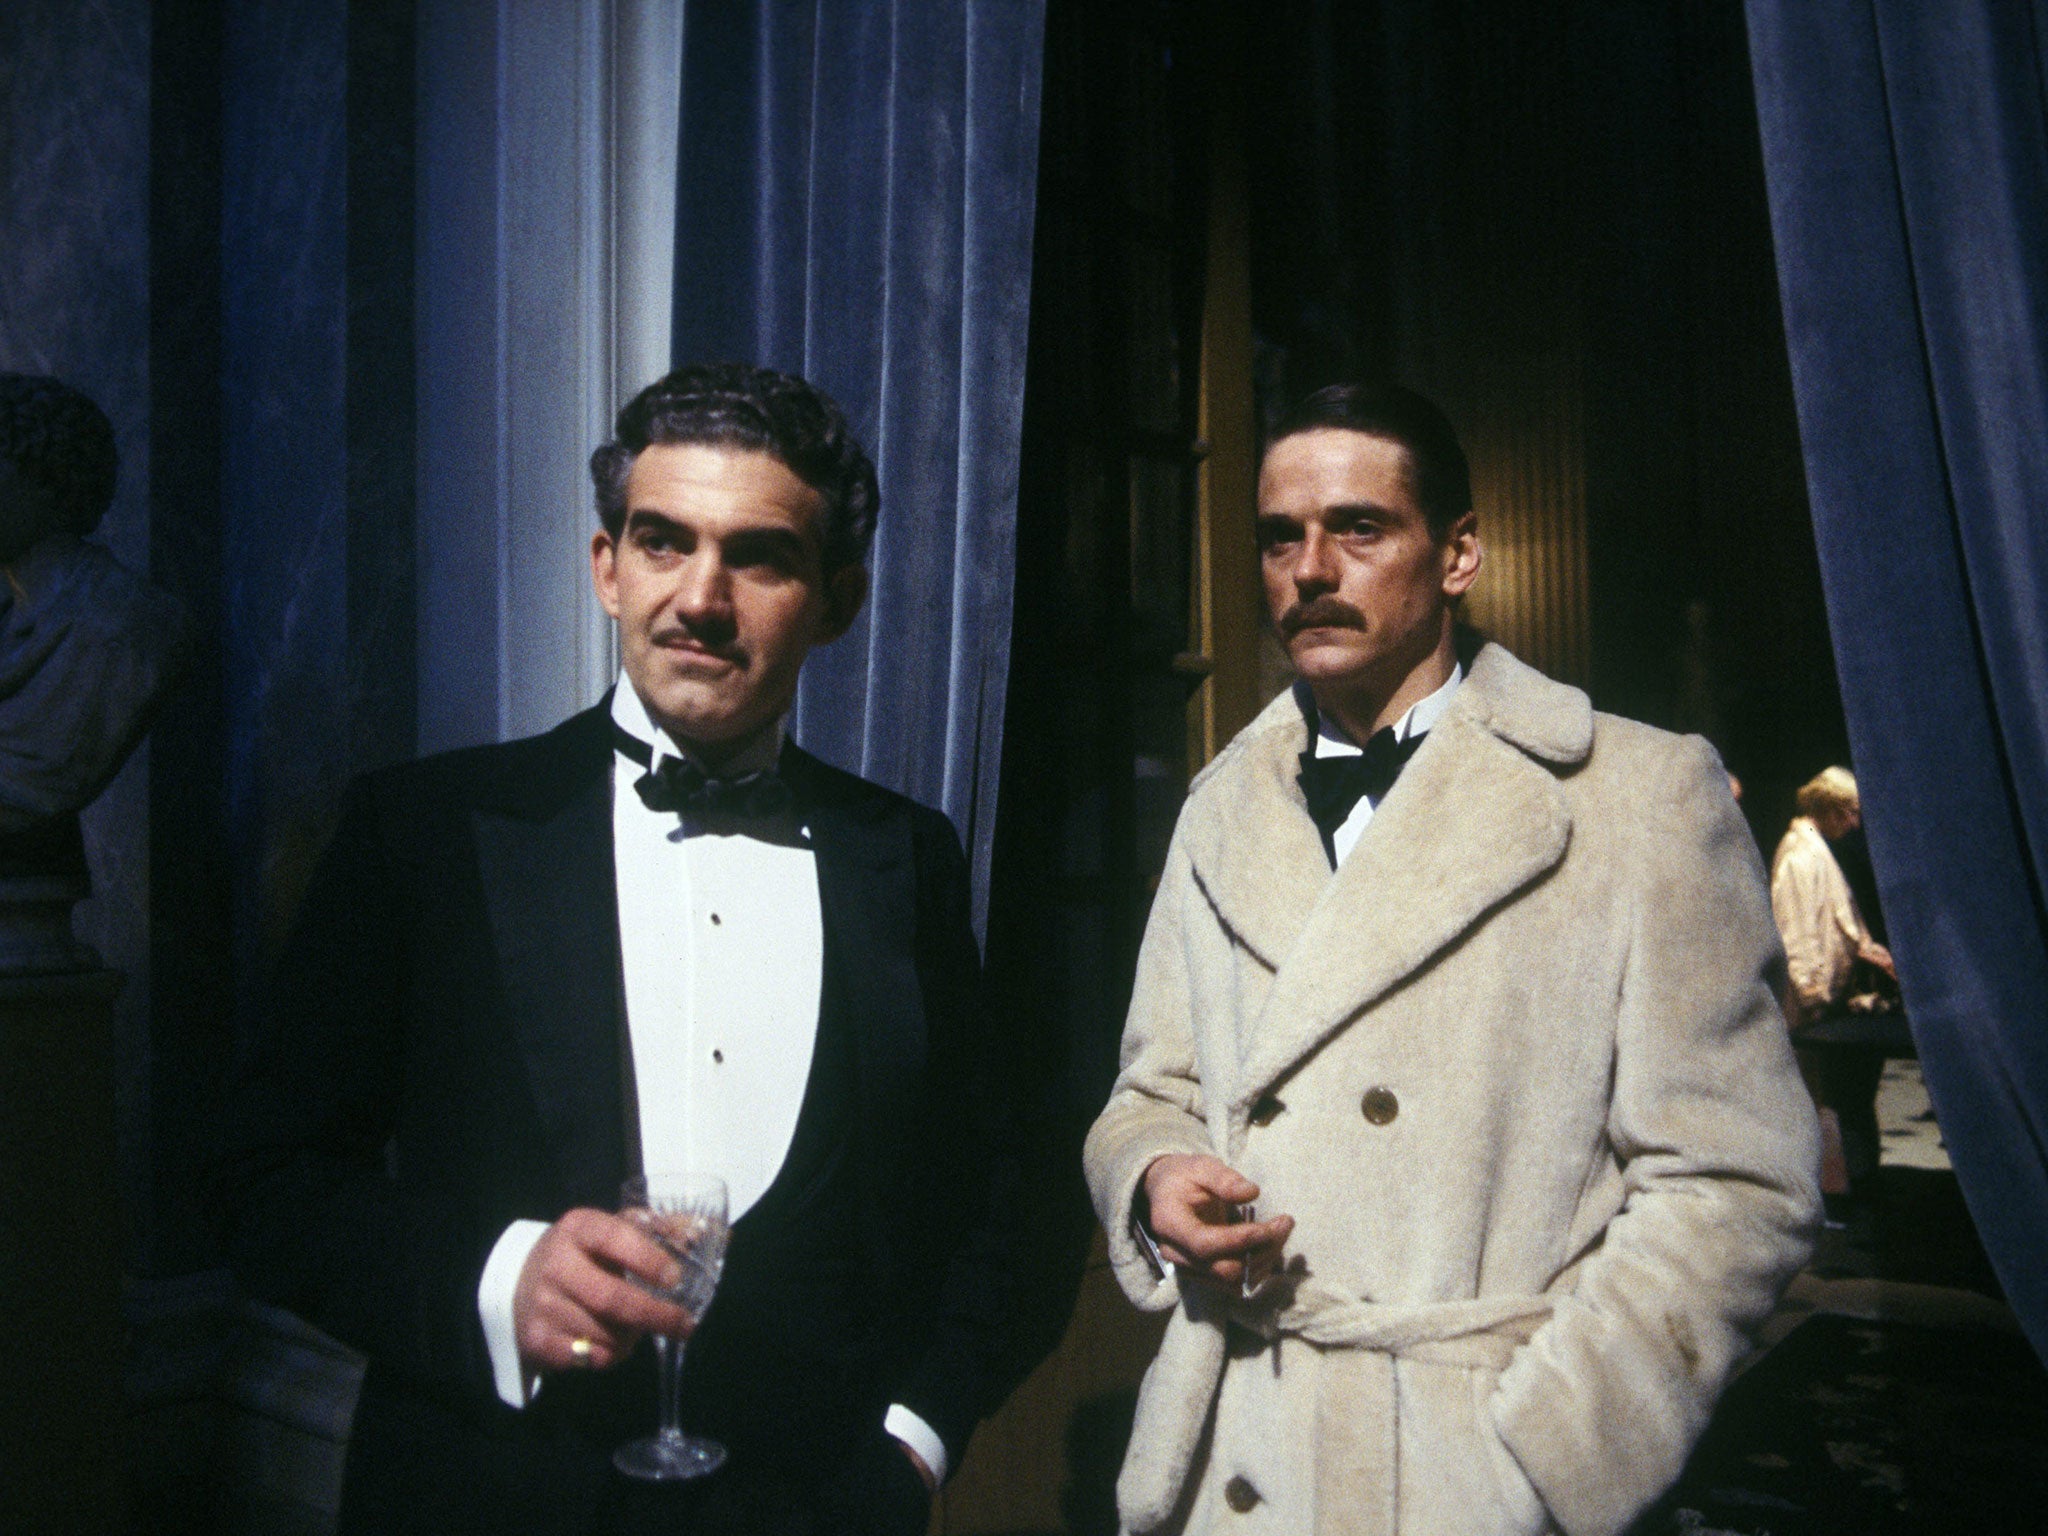 Sumptuous production: Chris Keating (left) with Jeremy Irons in ITV’s 1981 adaptation
of ‘Brideshead Revisited’